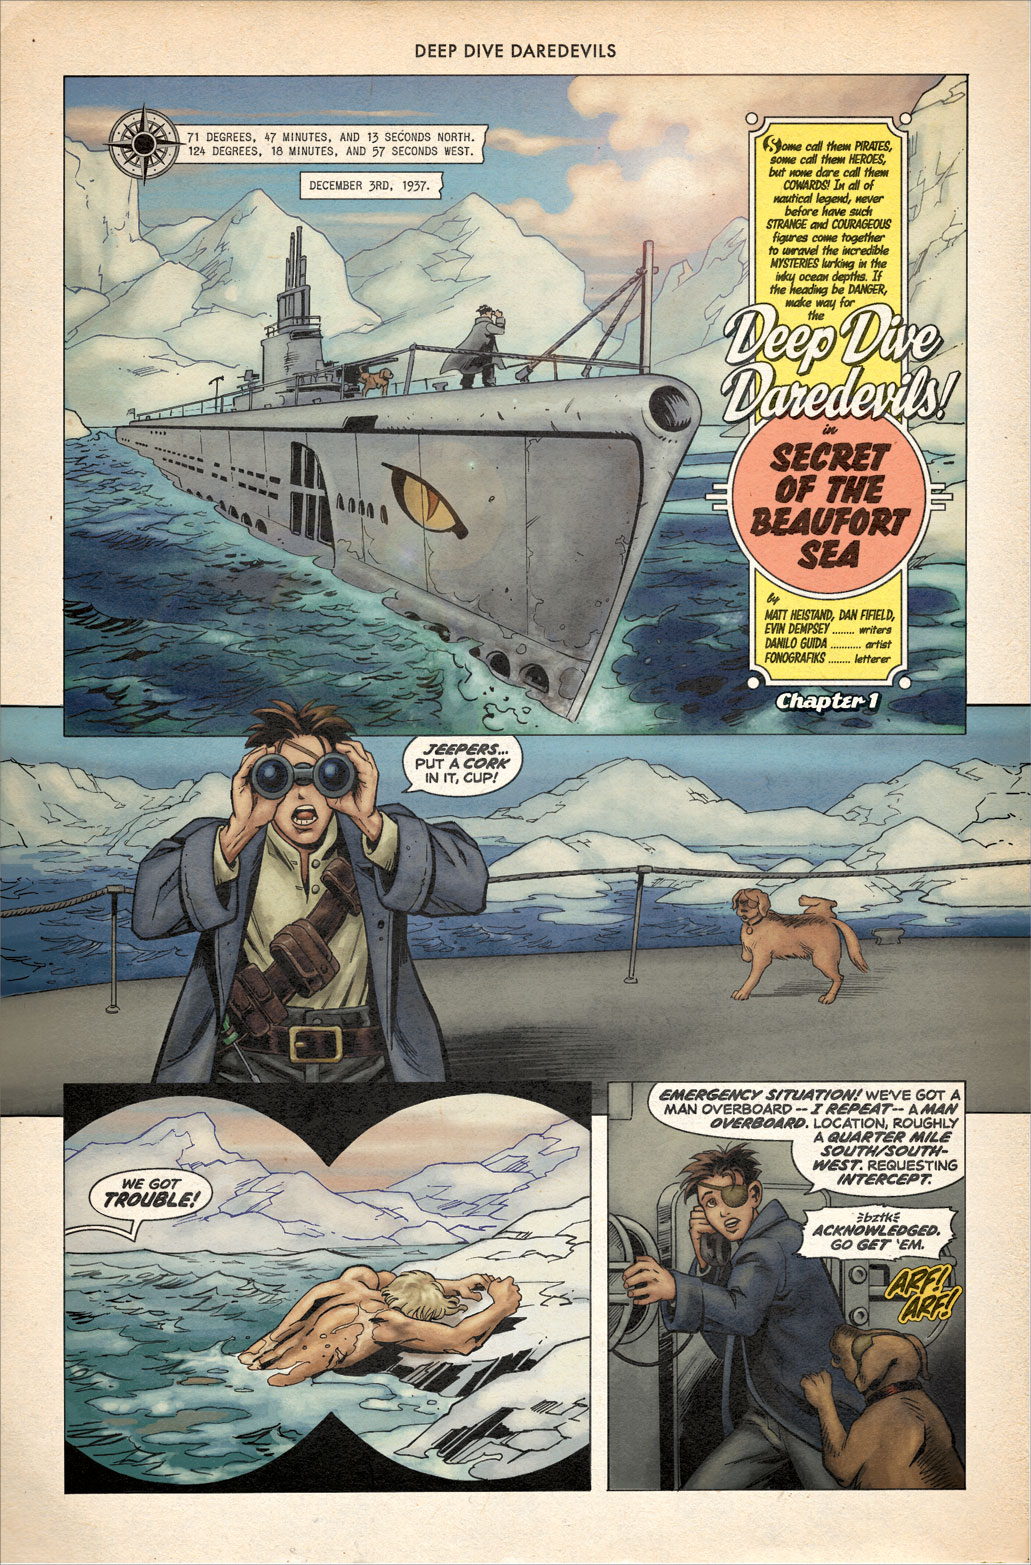 Secret of the Beaufort Sea – Page 2